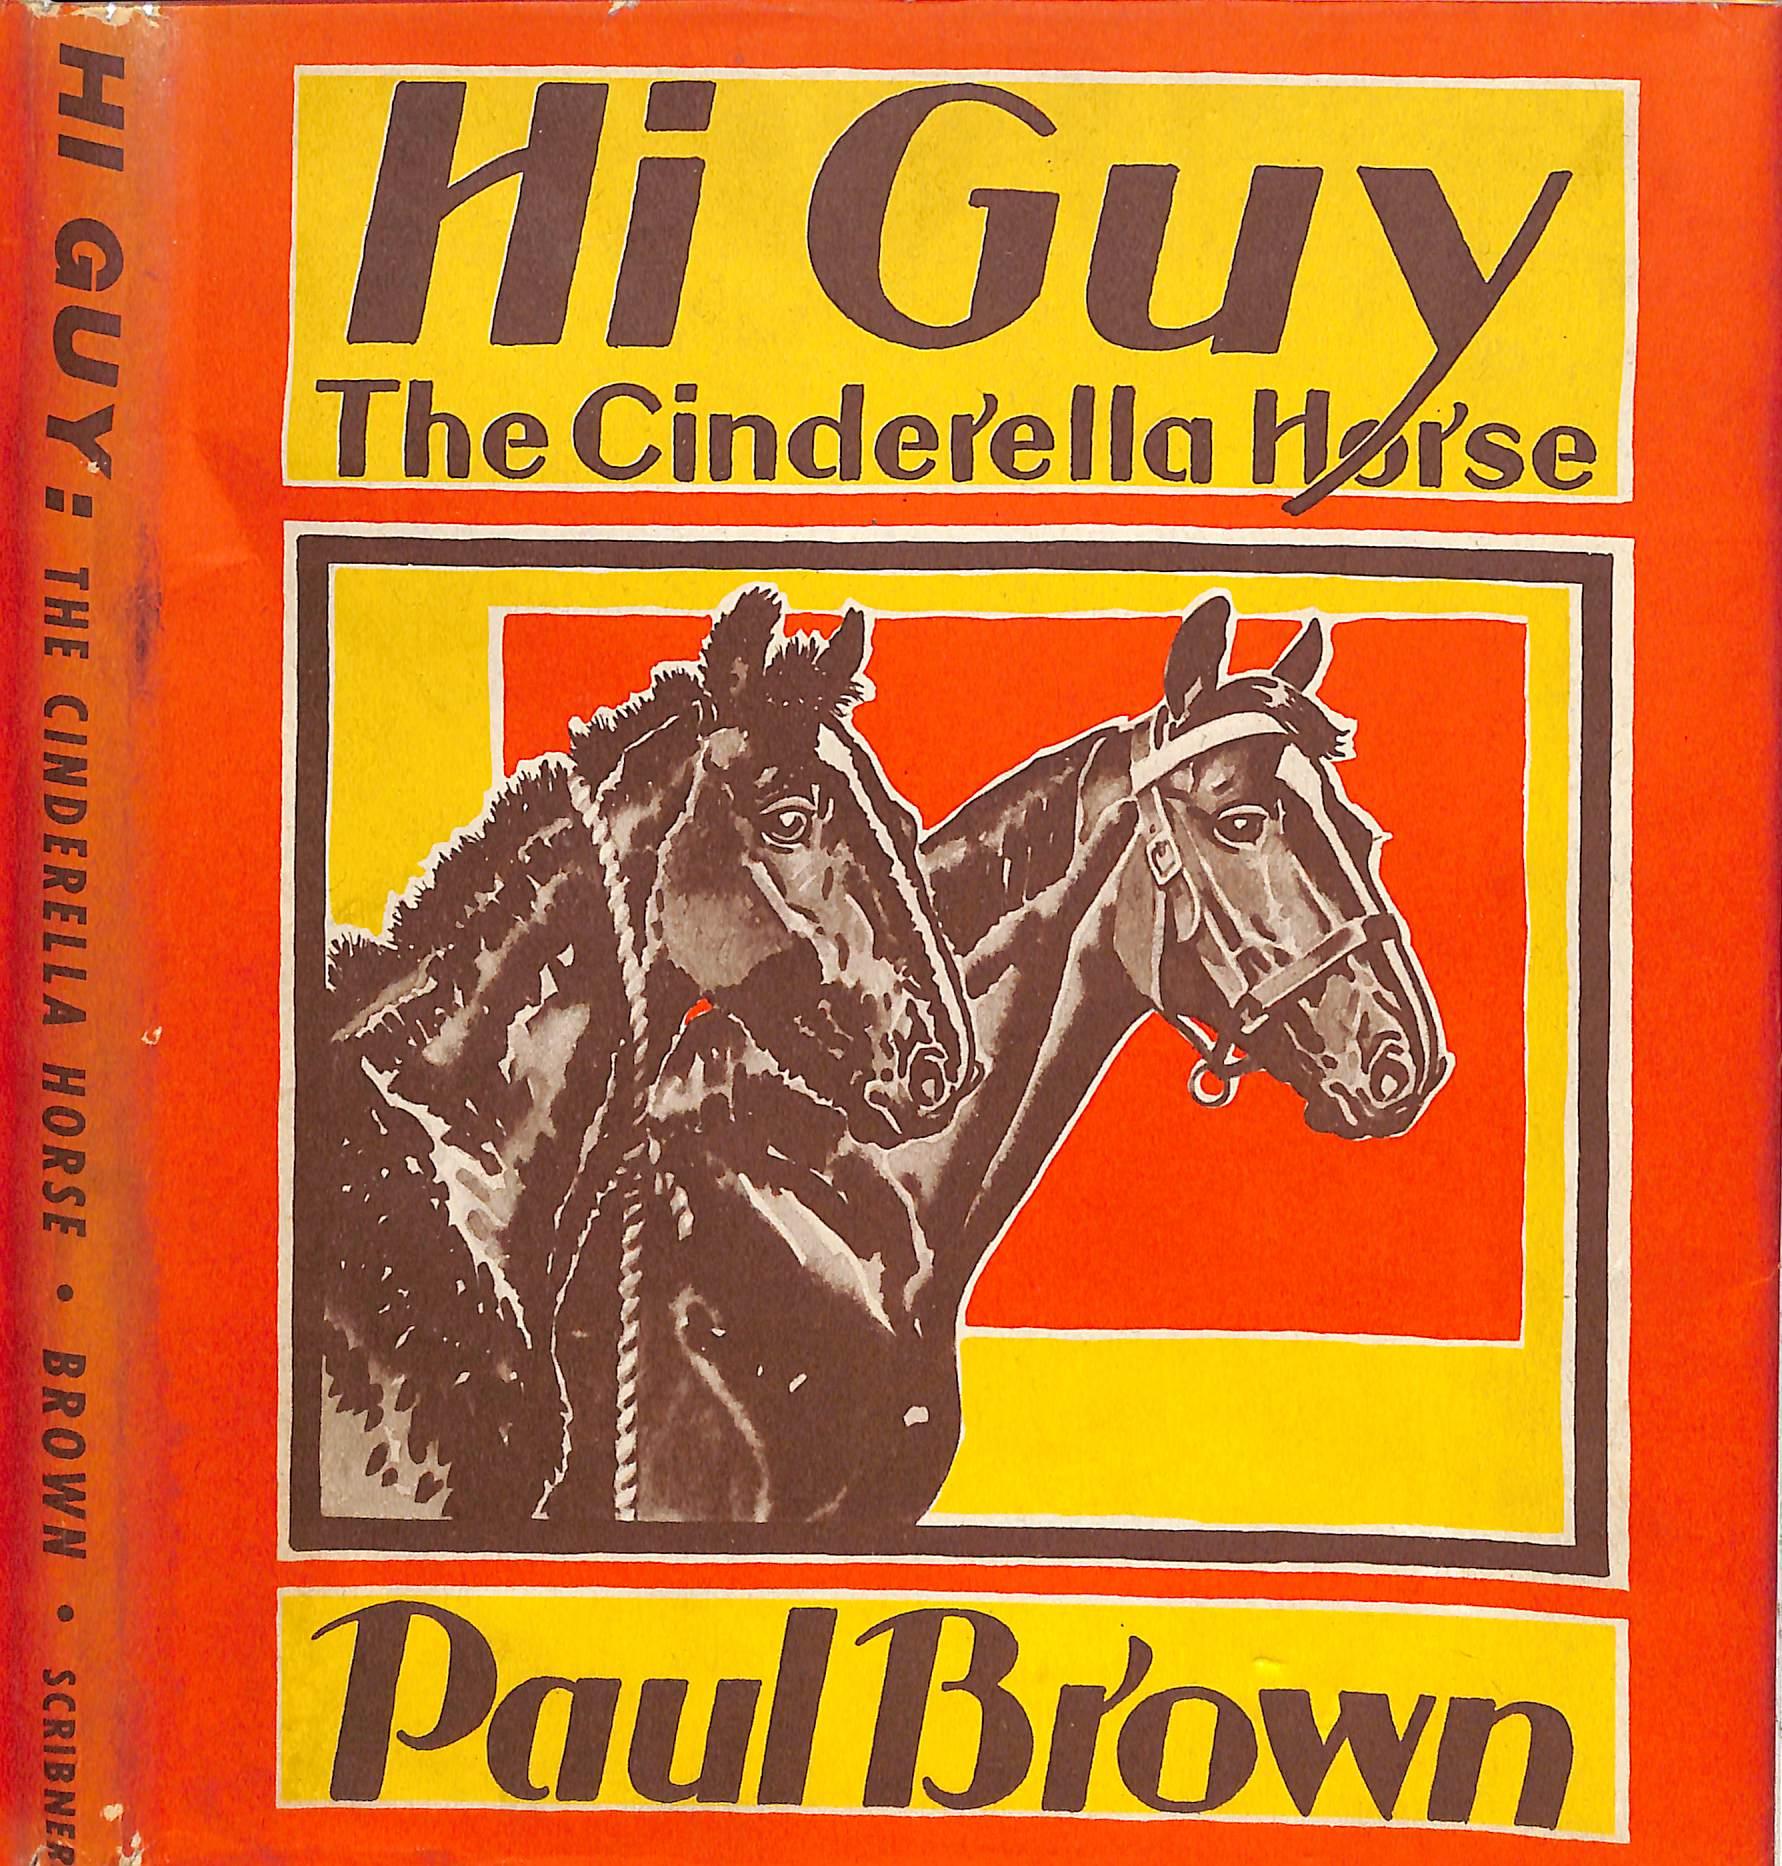 Original 1944 Pencil Drawing From Hi, Guy! The Cinderella Horse By Paul Brown 24 For Sale 4